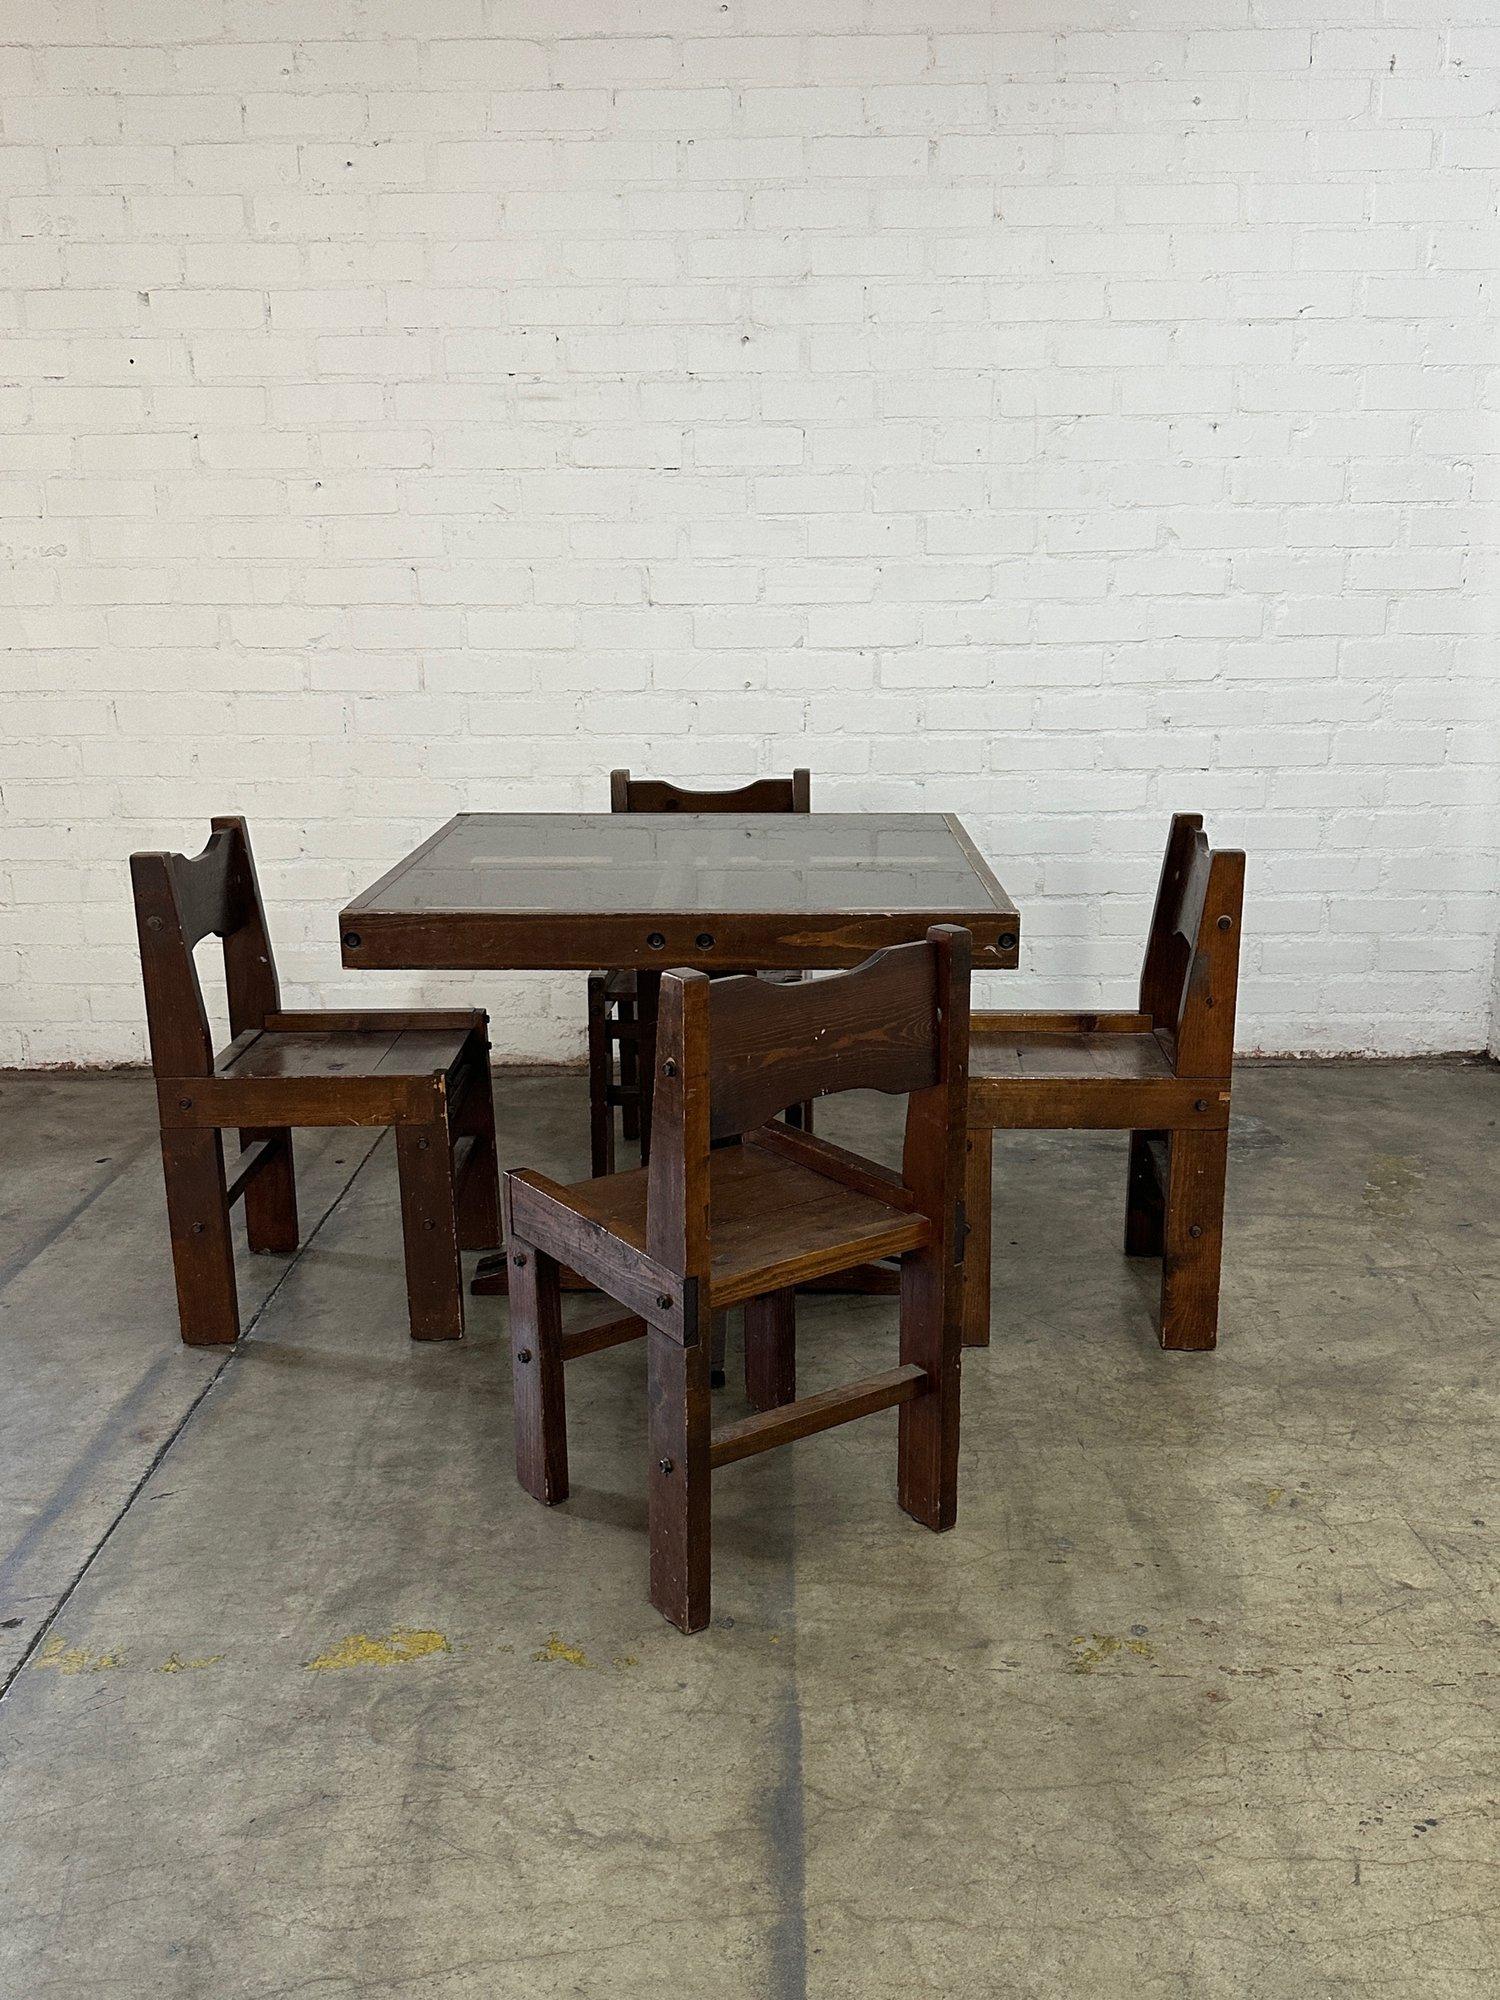 Mid-20th Century Distressed Rustic Dining table